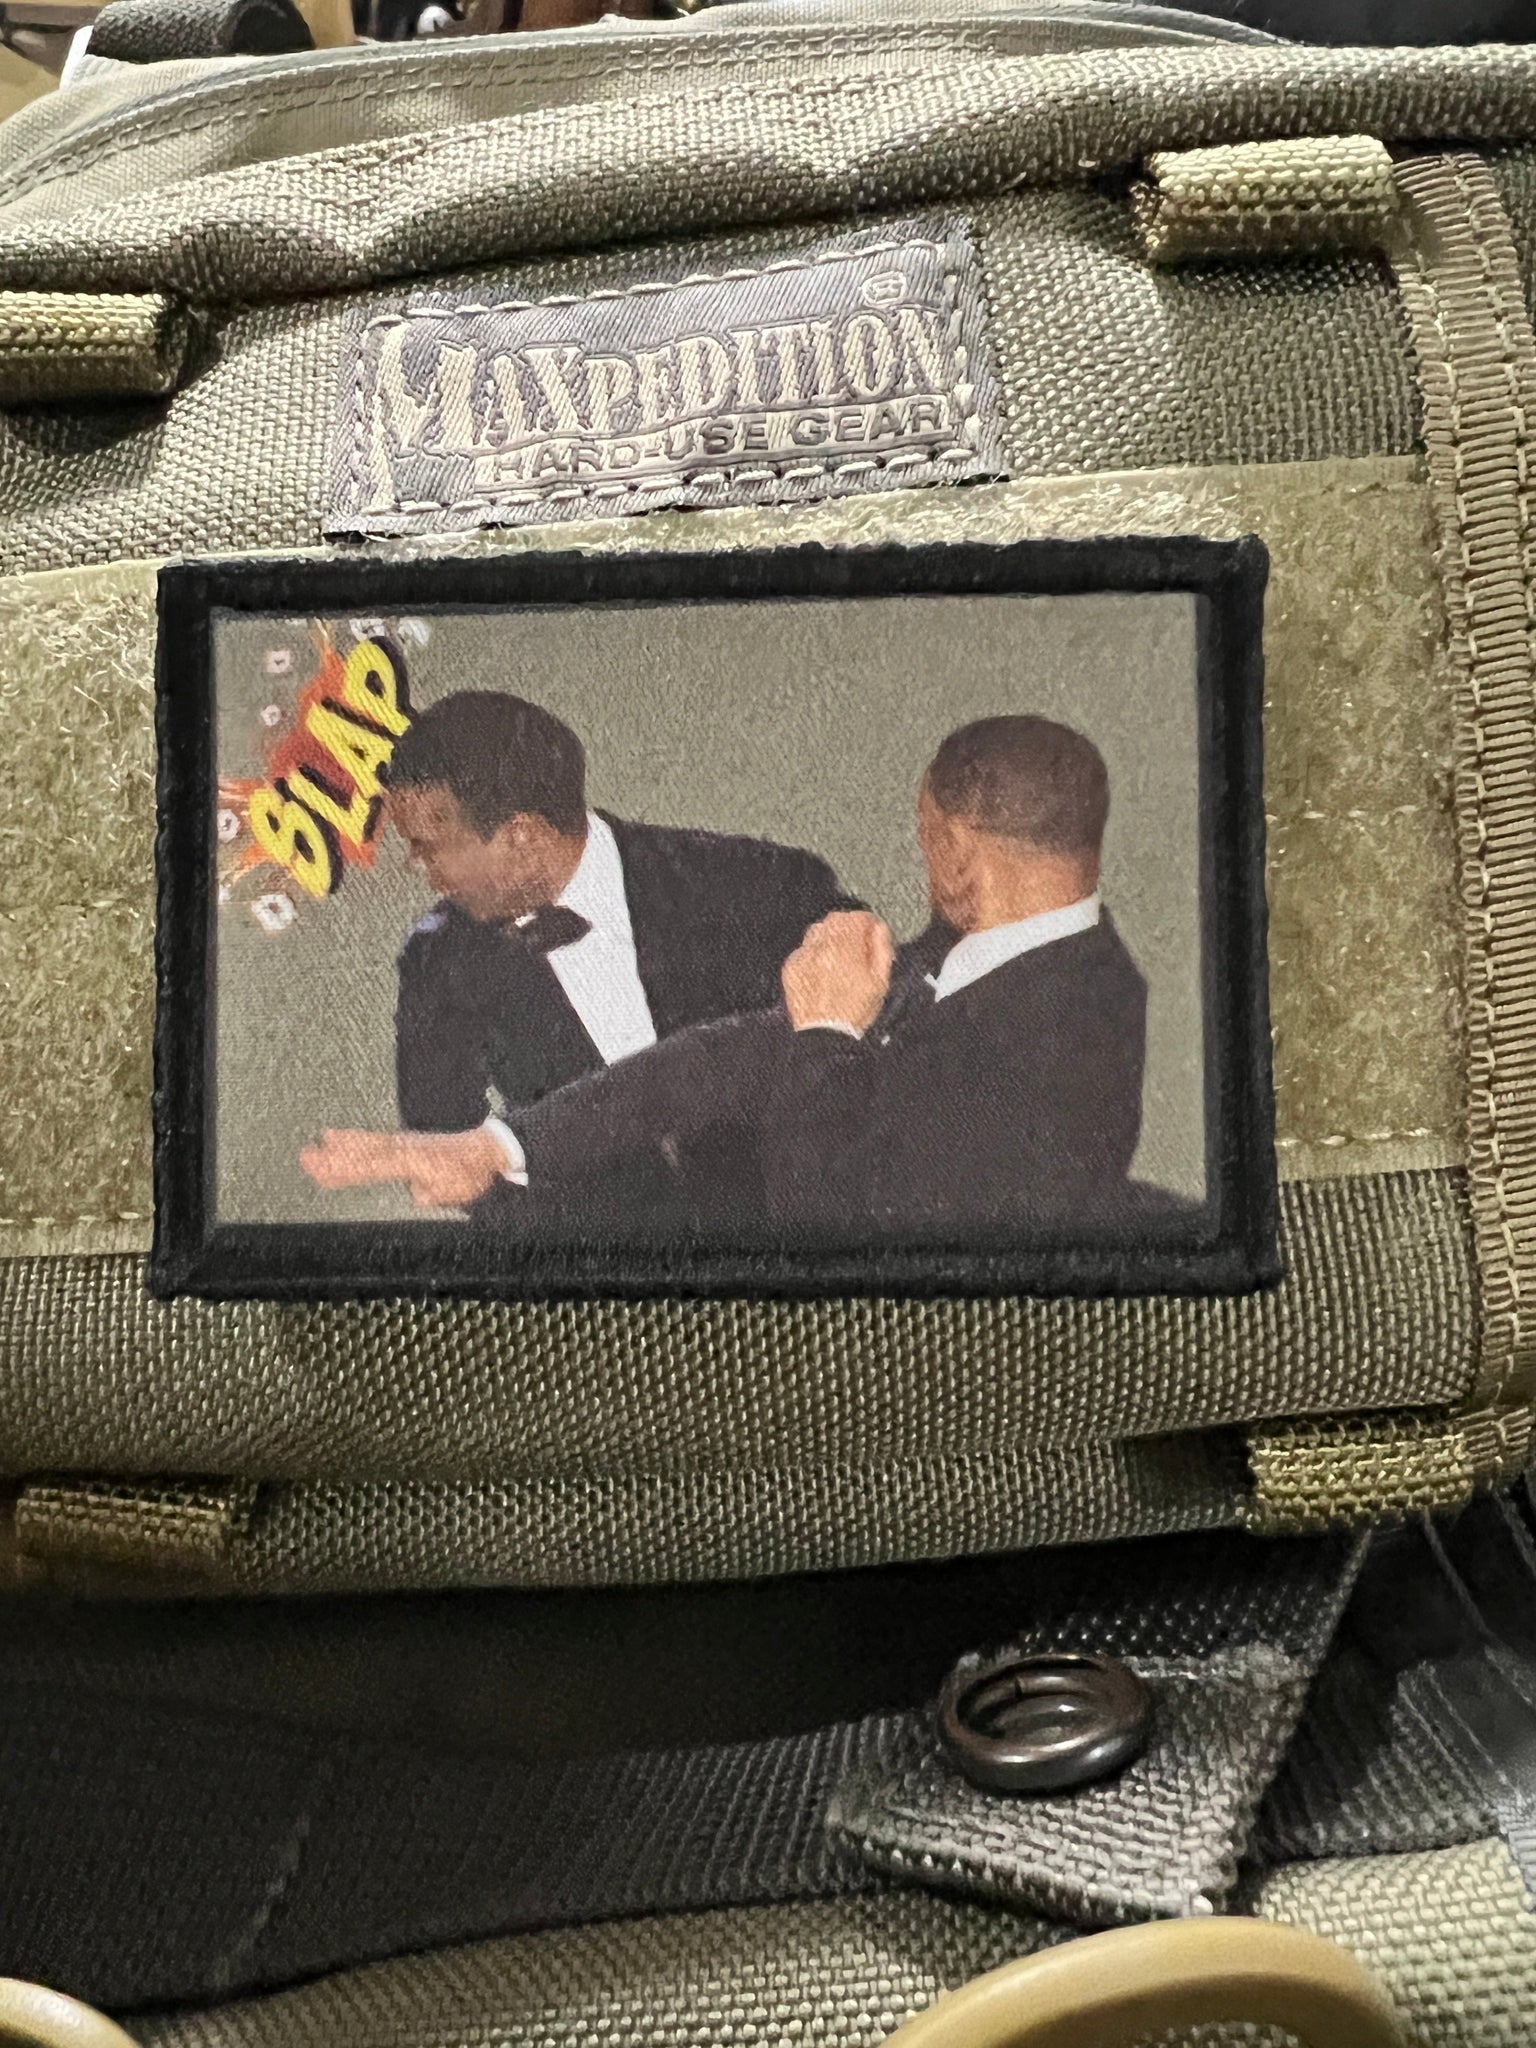 Will Smith SLAP Morale Patch 2